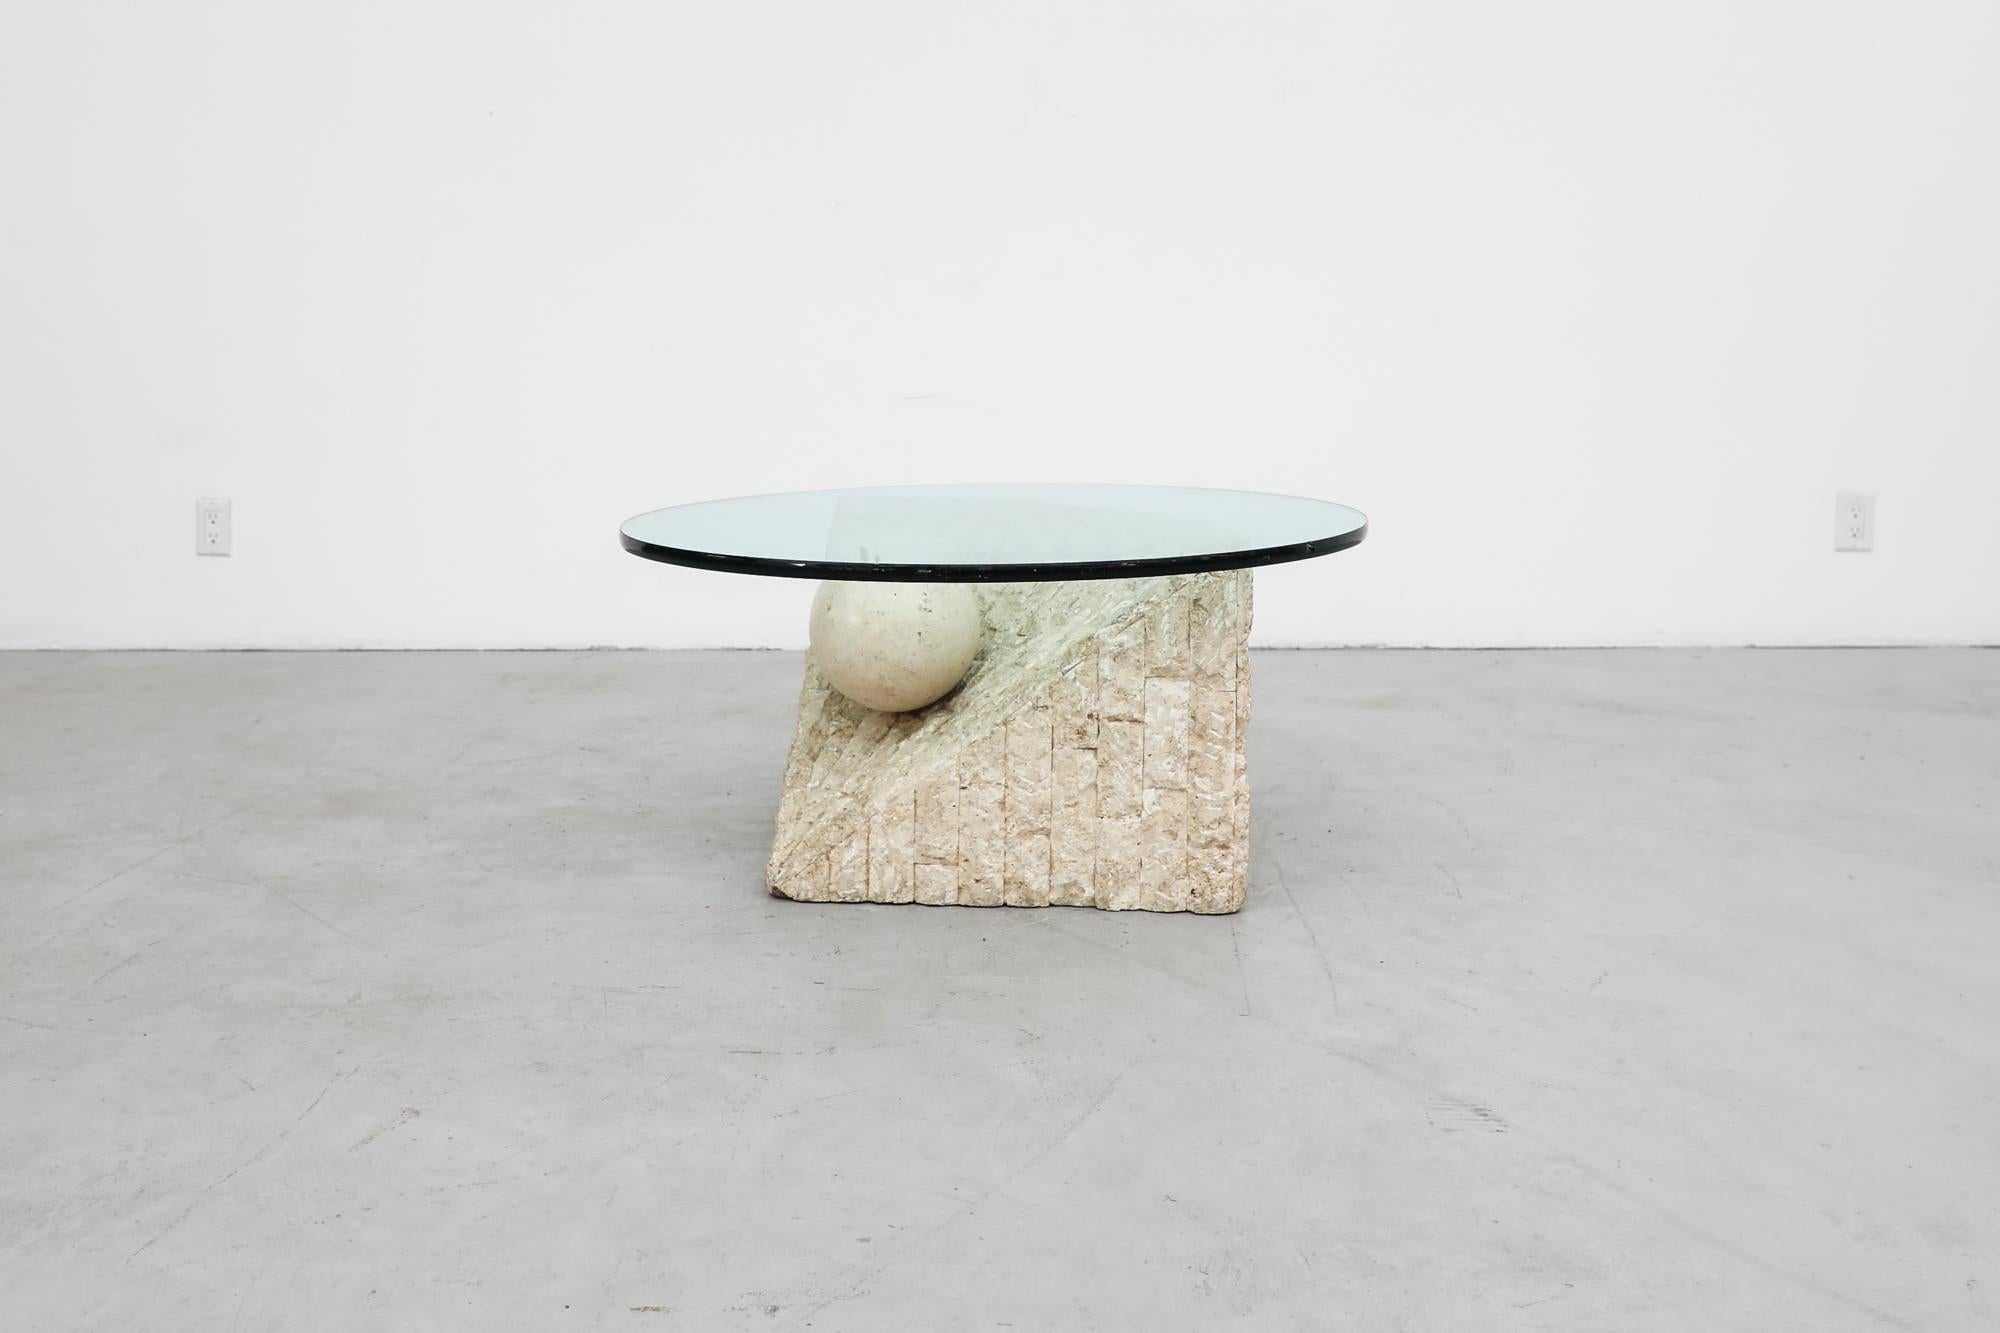 1995 Post-Modern coffee table with round glass (not original to table) and tessellated Mactan stone triangle base with suspended pearl design. The original design had a triangle glass top.  The Mactan fossil stone used here is quarried exclusively